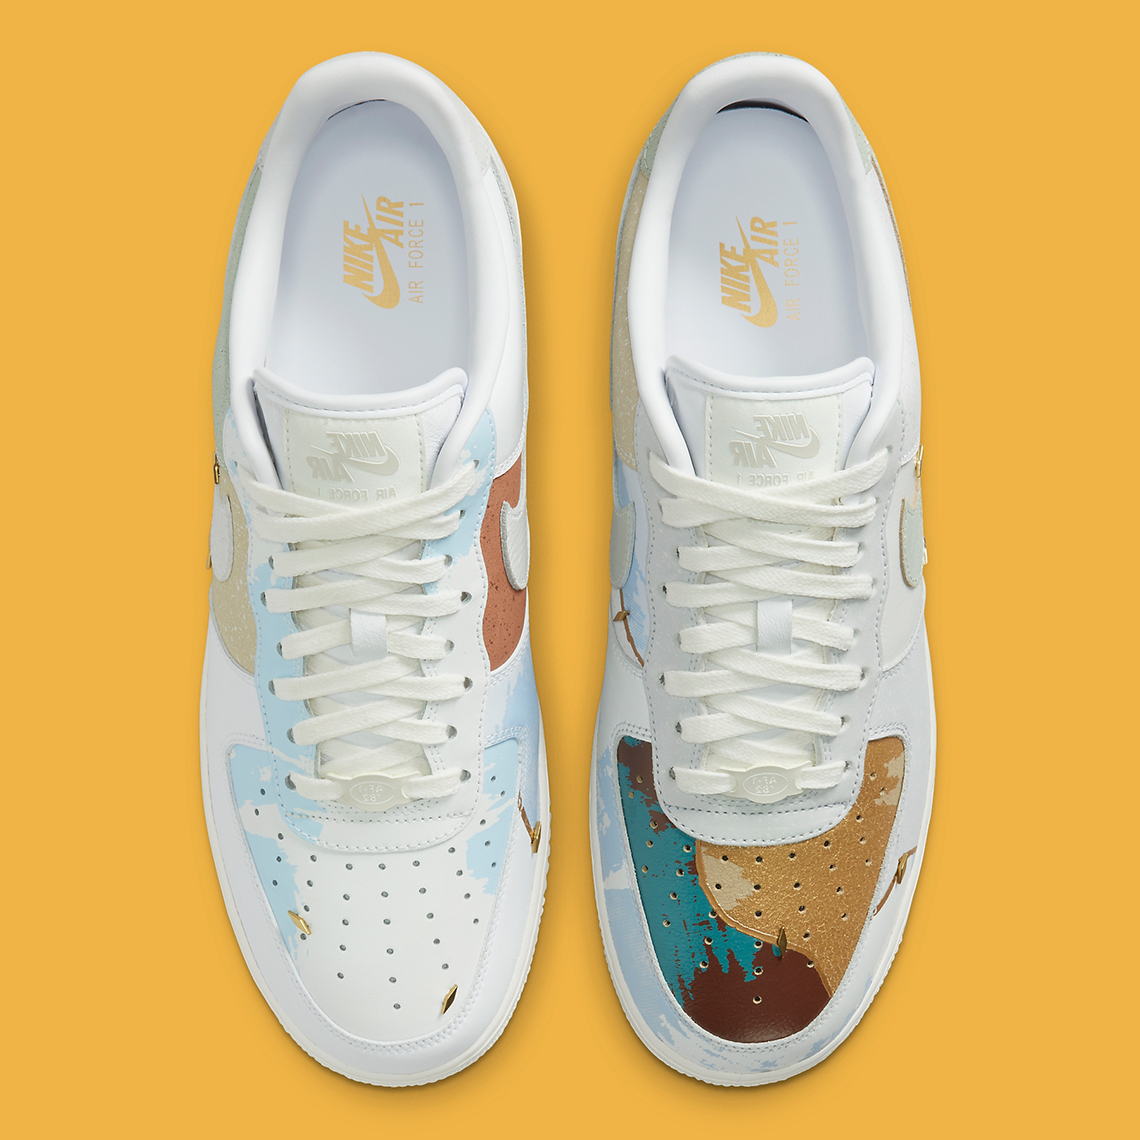 Celebrity-Collab Patchwork Sneakers : air force 1 low 1